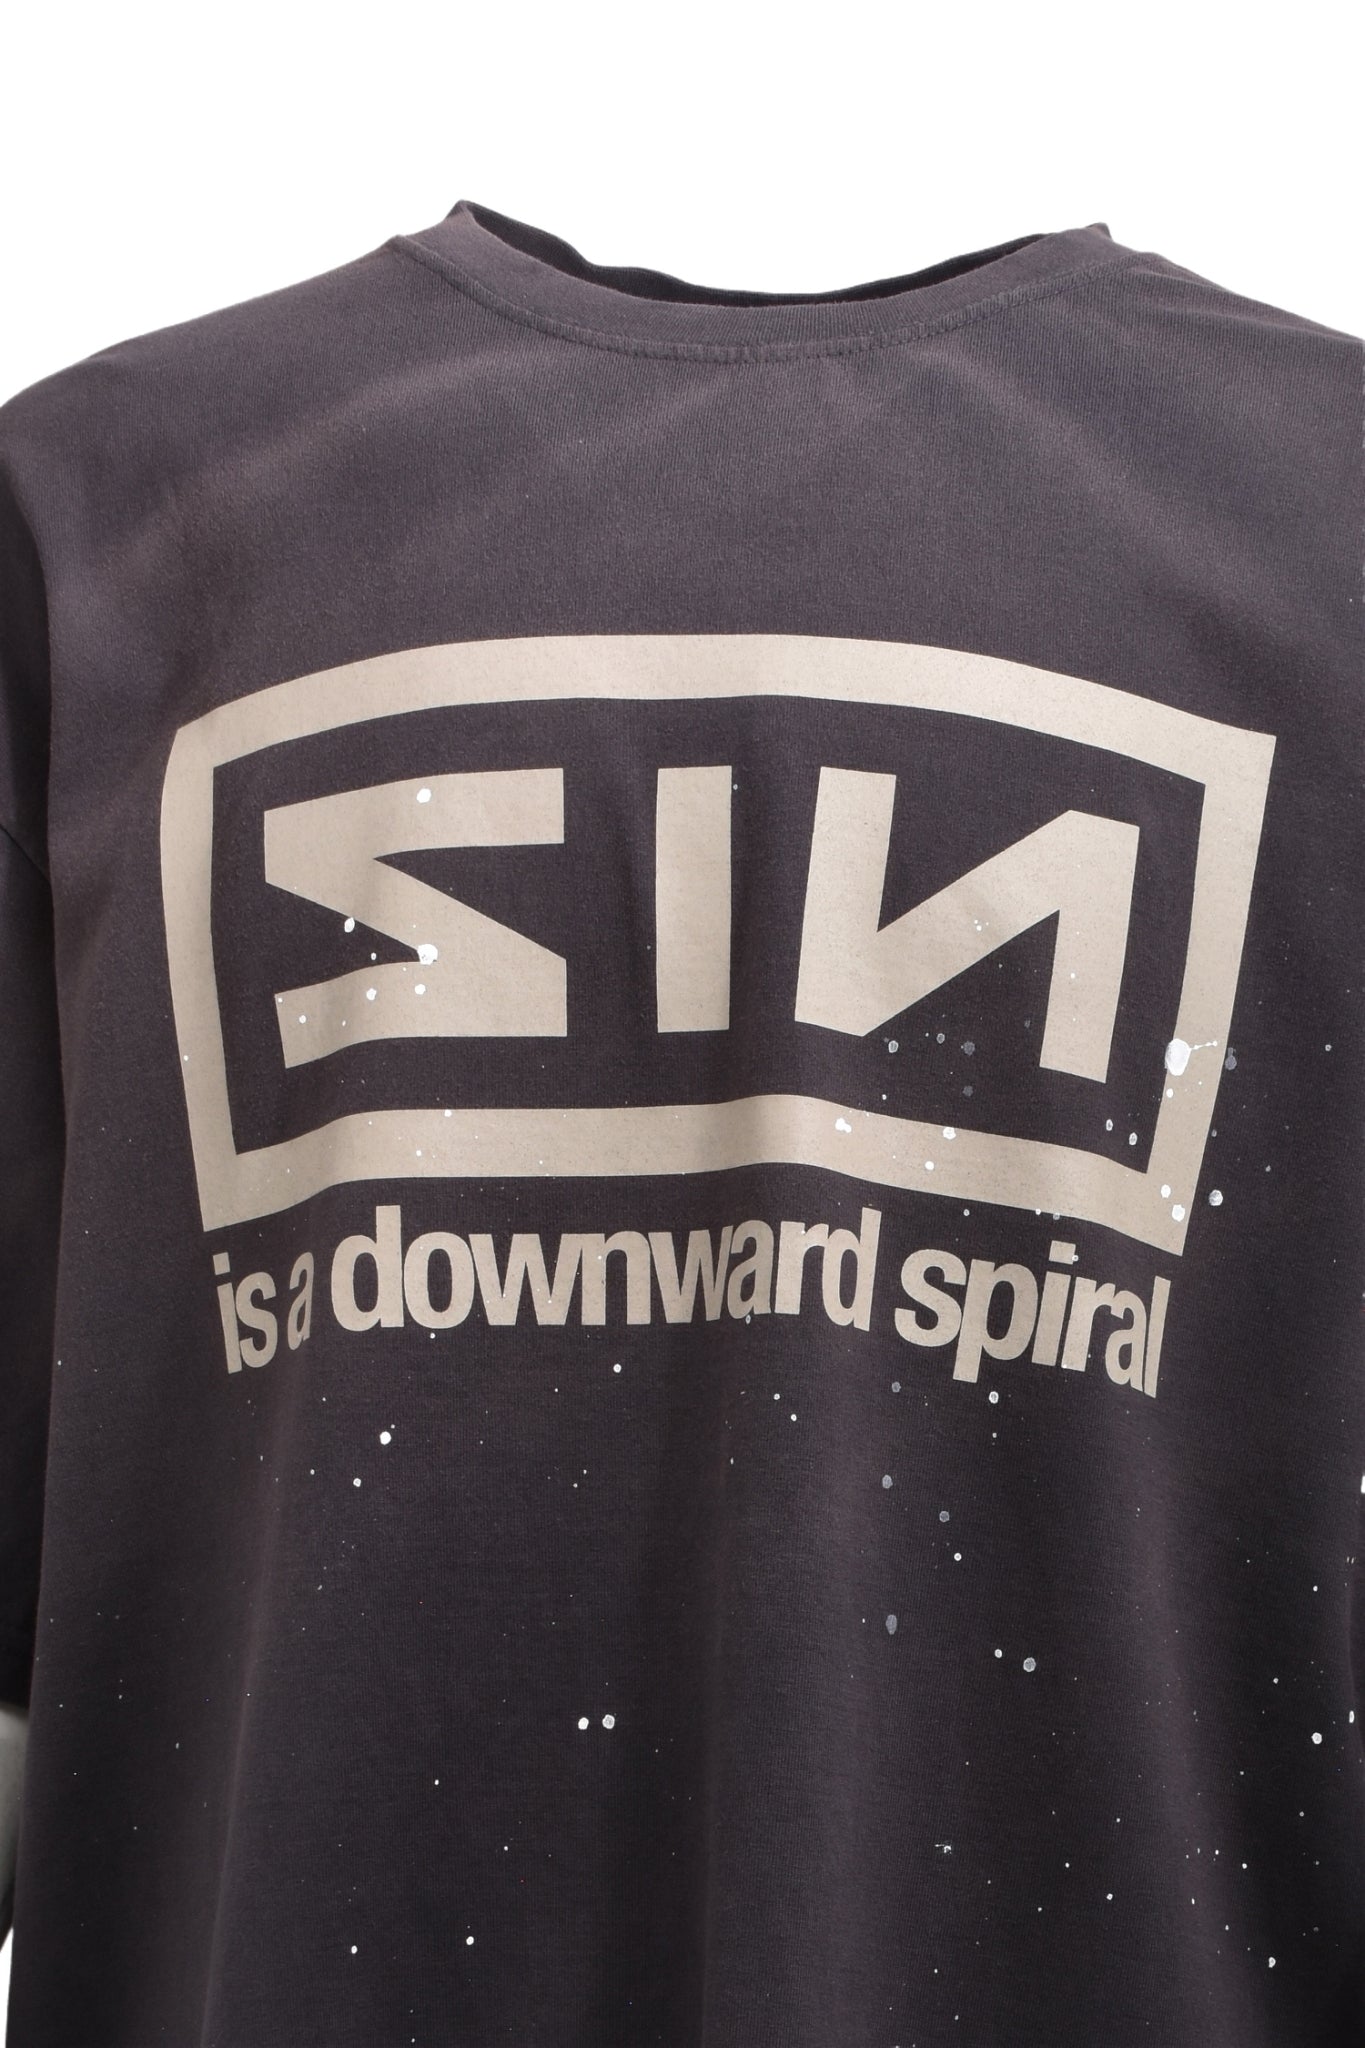 SIN WASHED T-SHIRT (EXCLUSIVE) / NVY